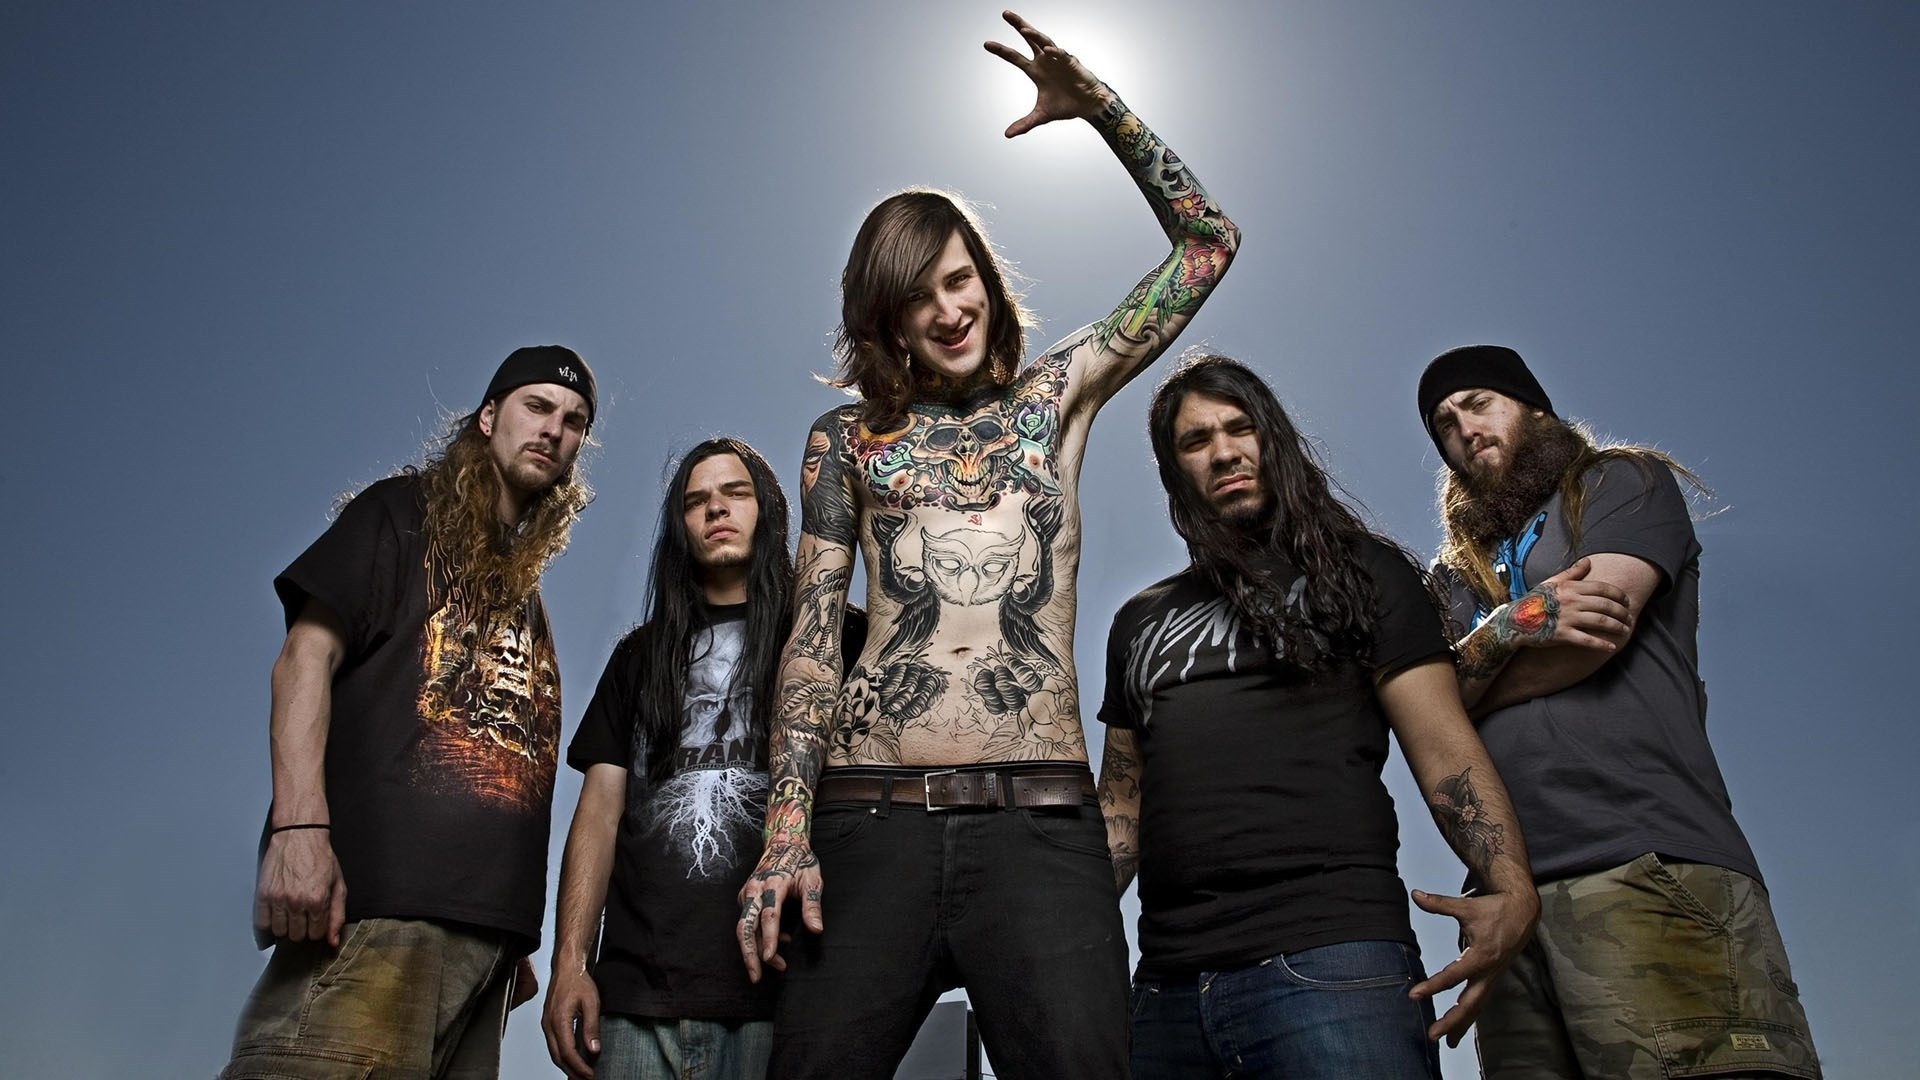 6 Suicide Silence HD Wallpapers | Backgrounds - Wallpaper Abyss